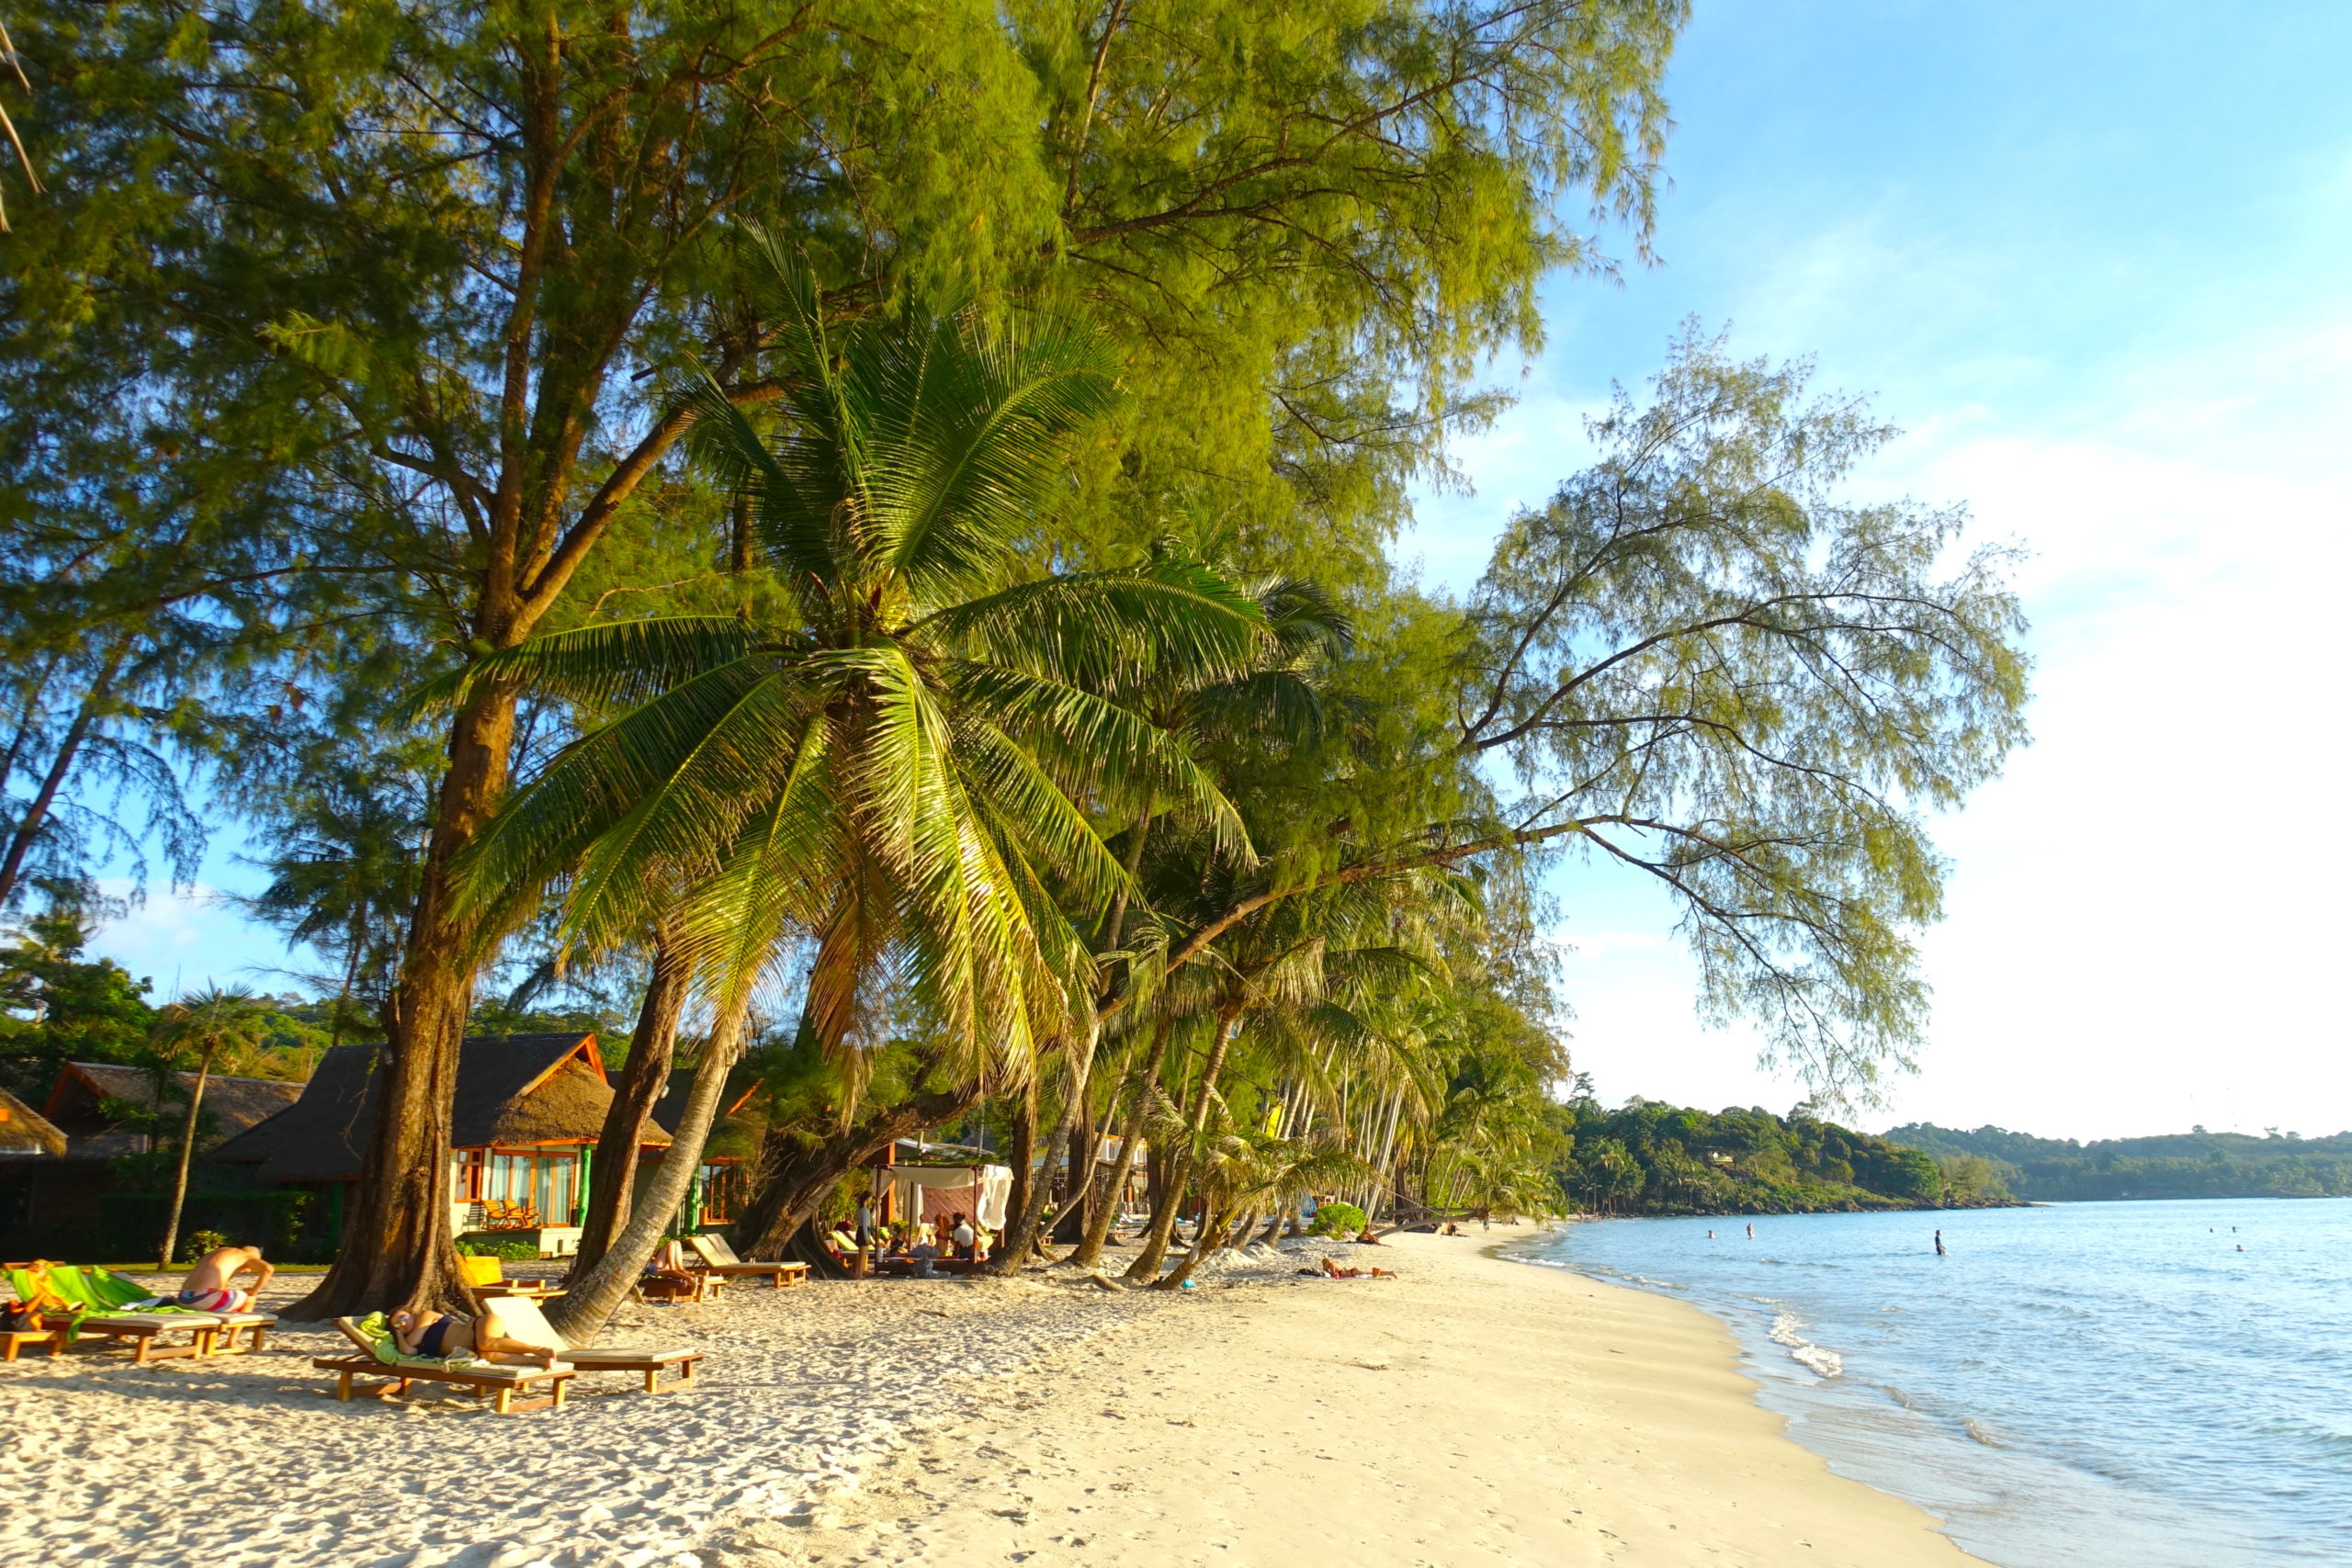 Palm trees, white sand, some huts and a calm sea at Khlong Chao beach in Koh Kood